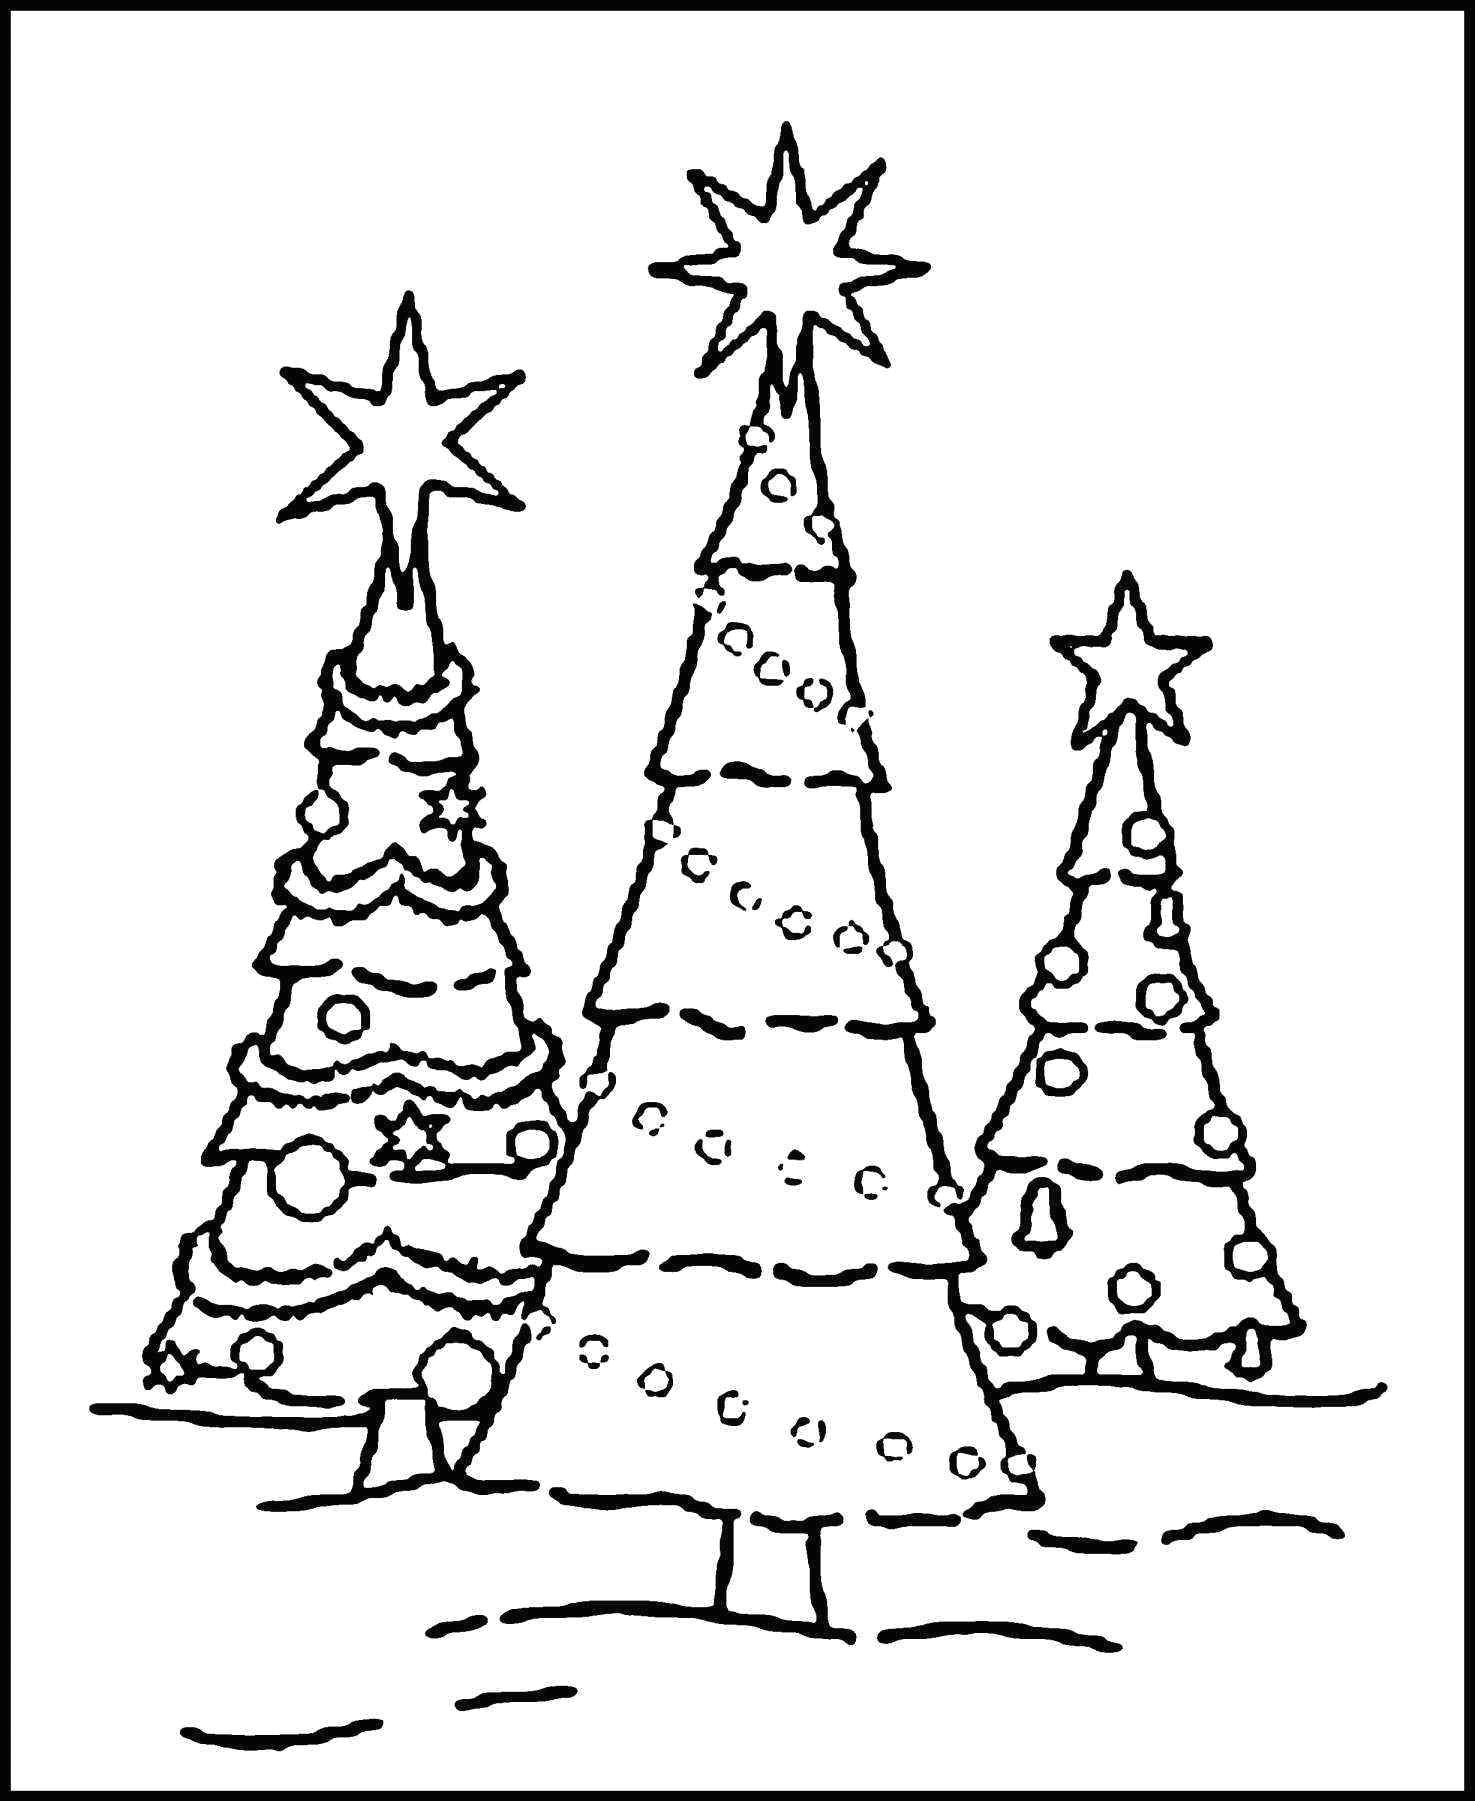 Drawing Xmas Decorations New Christmas Decorations Black and White Png Prekhome